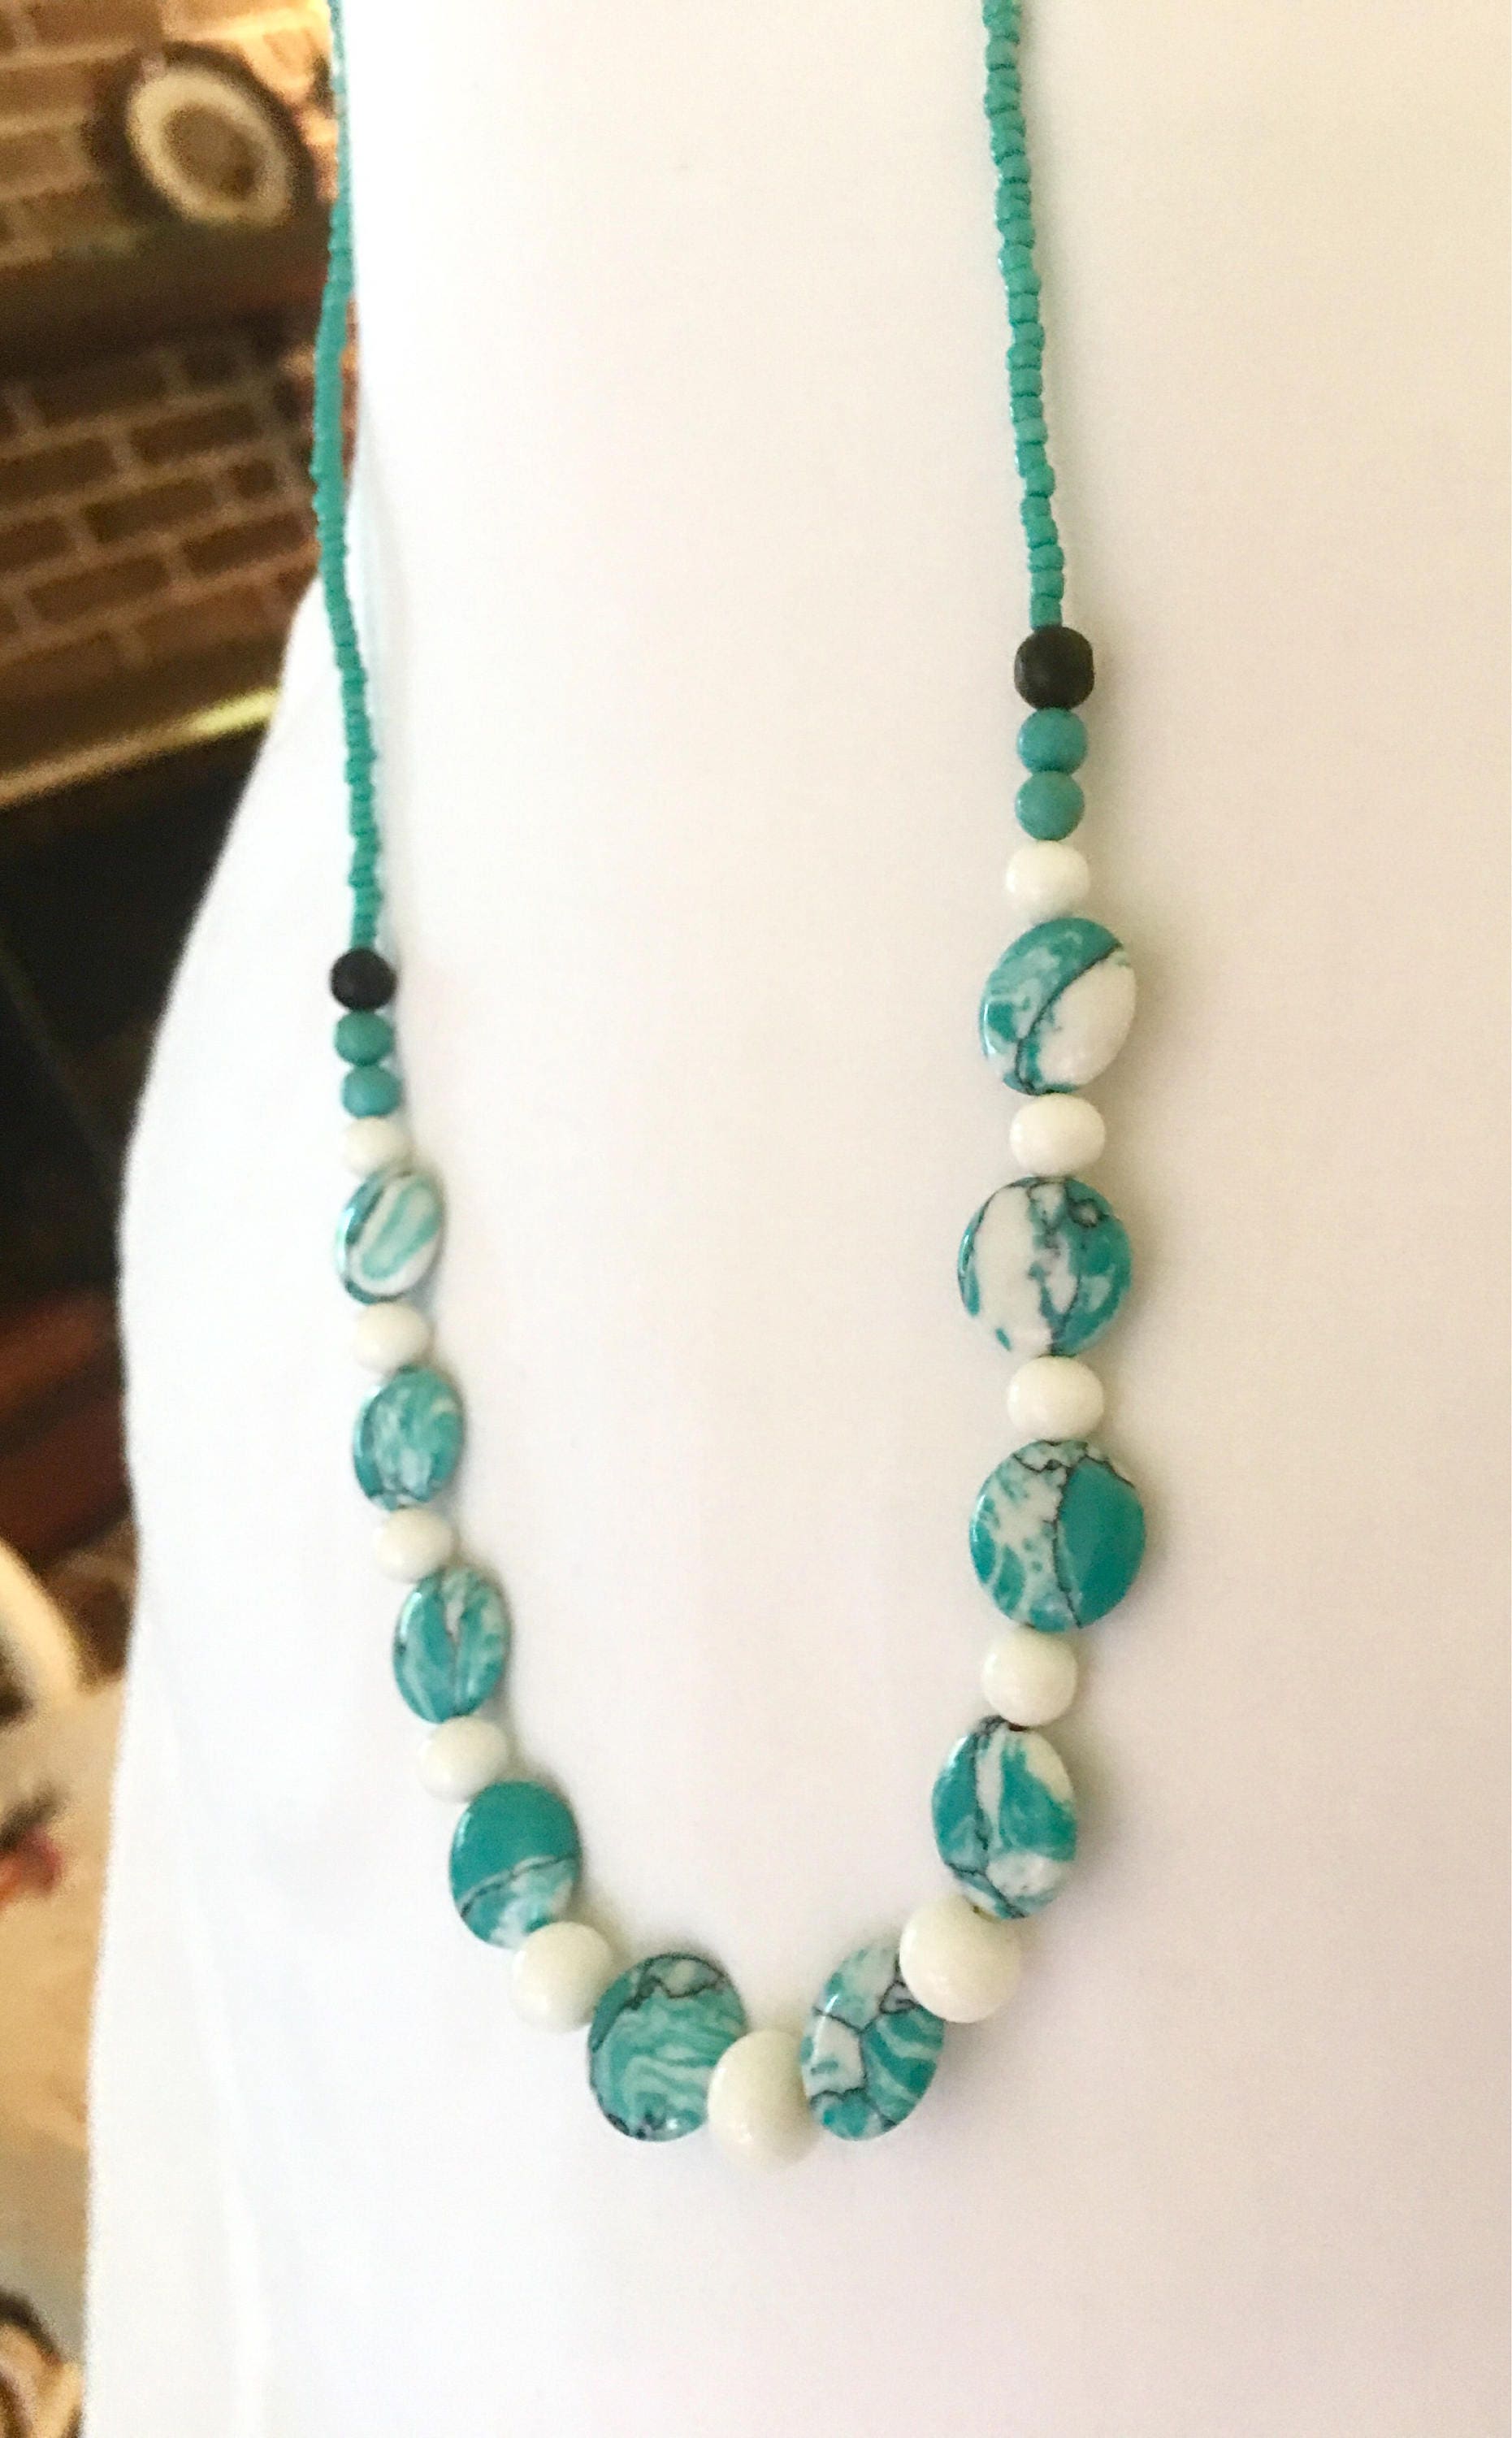 Womens necklace hand made bead necklace turquoise white